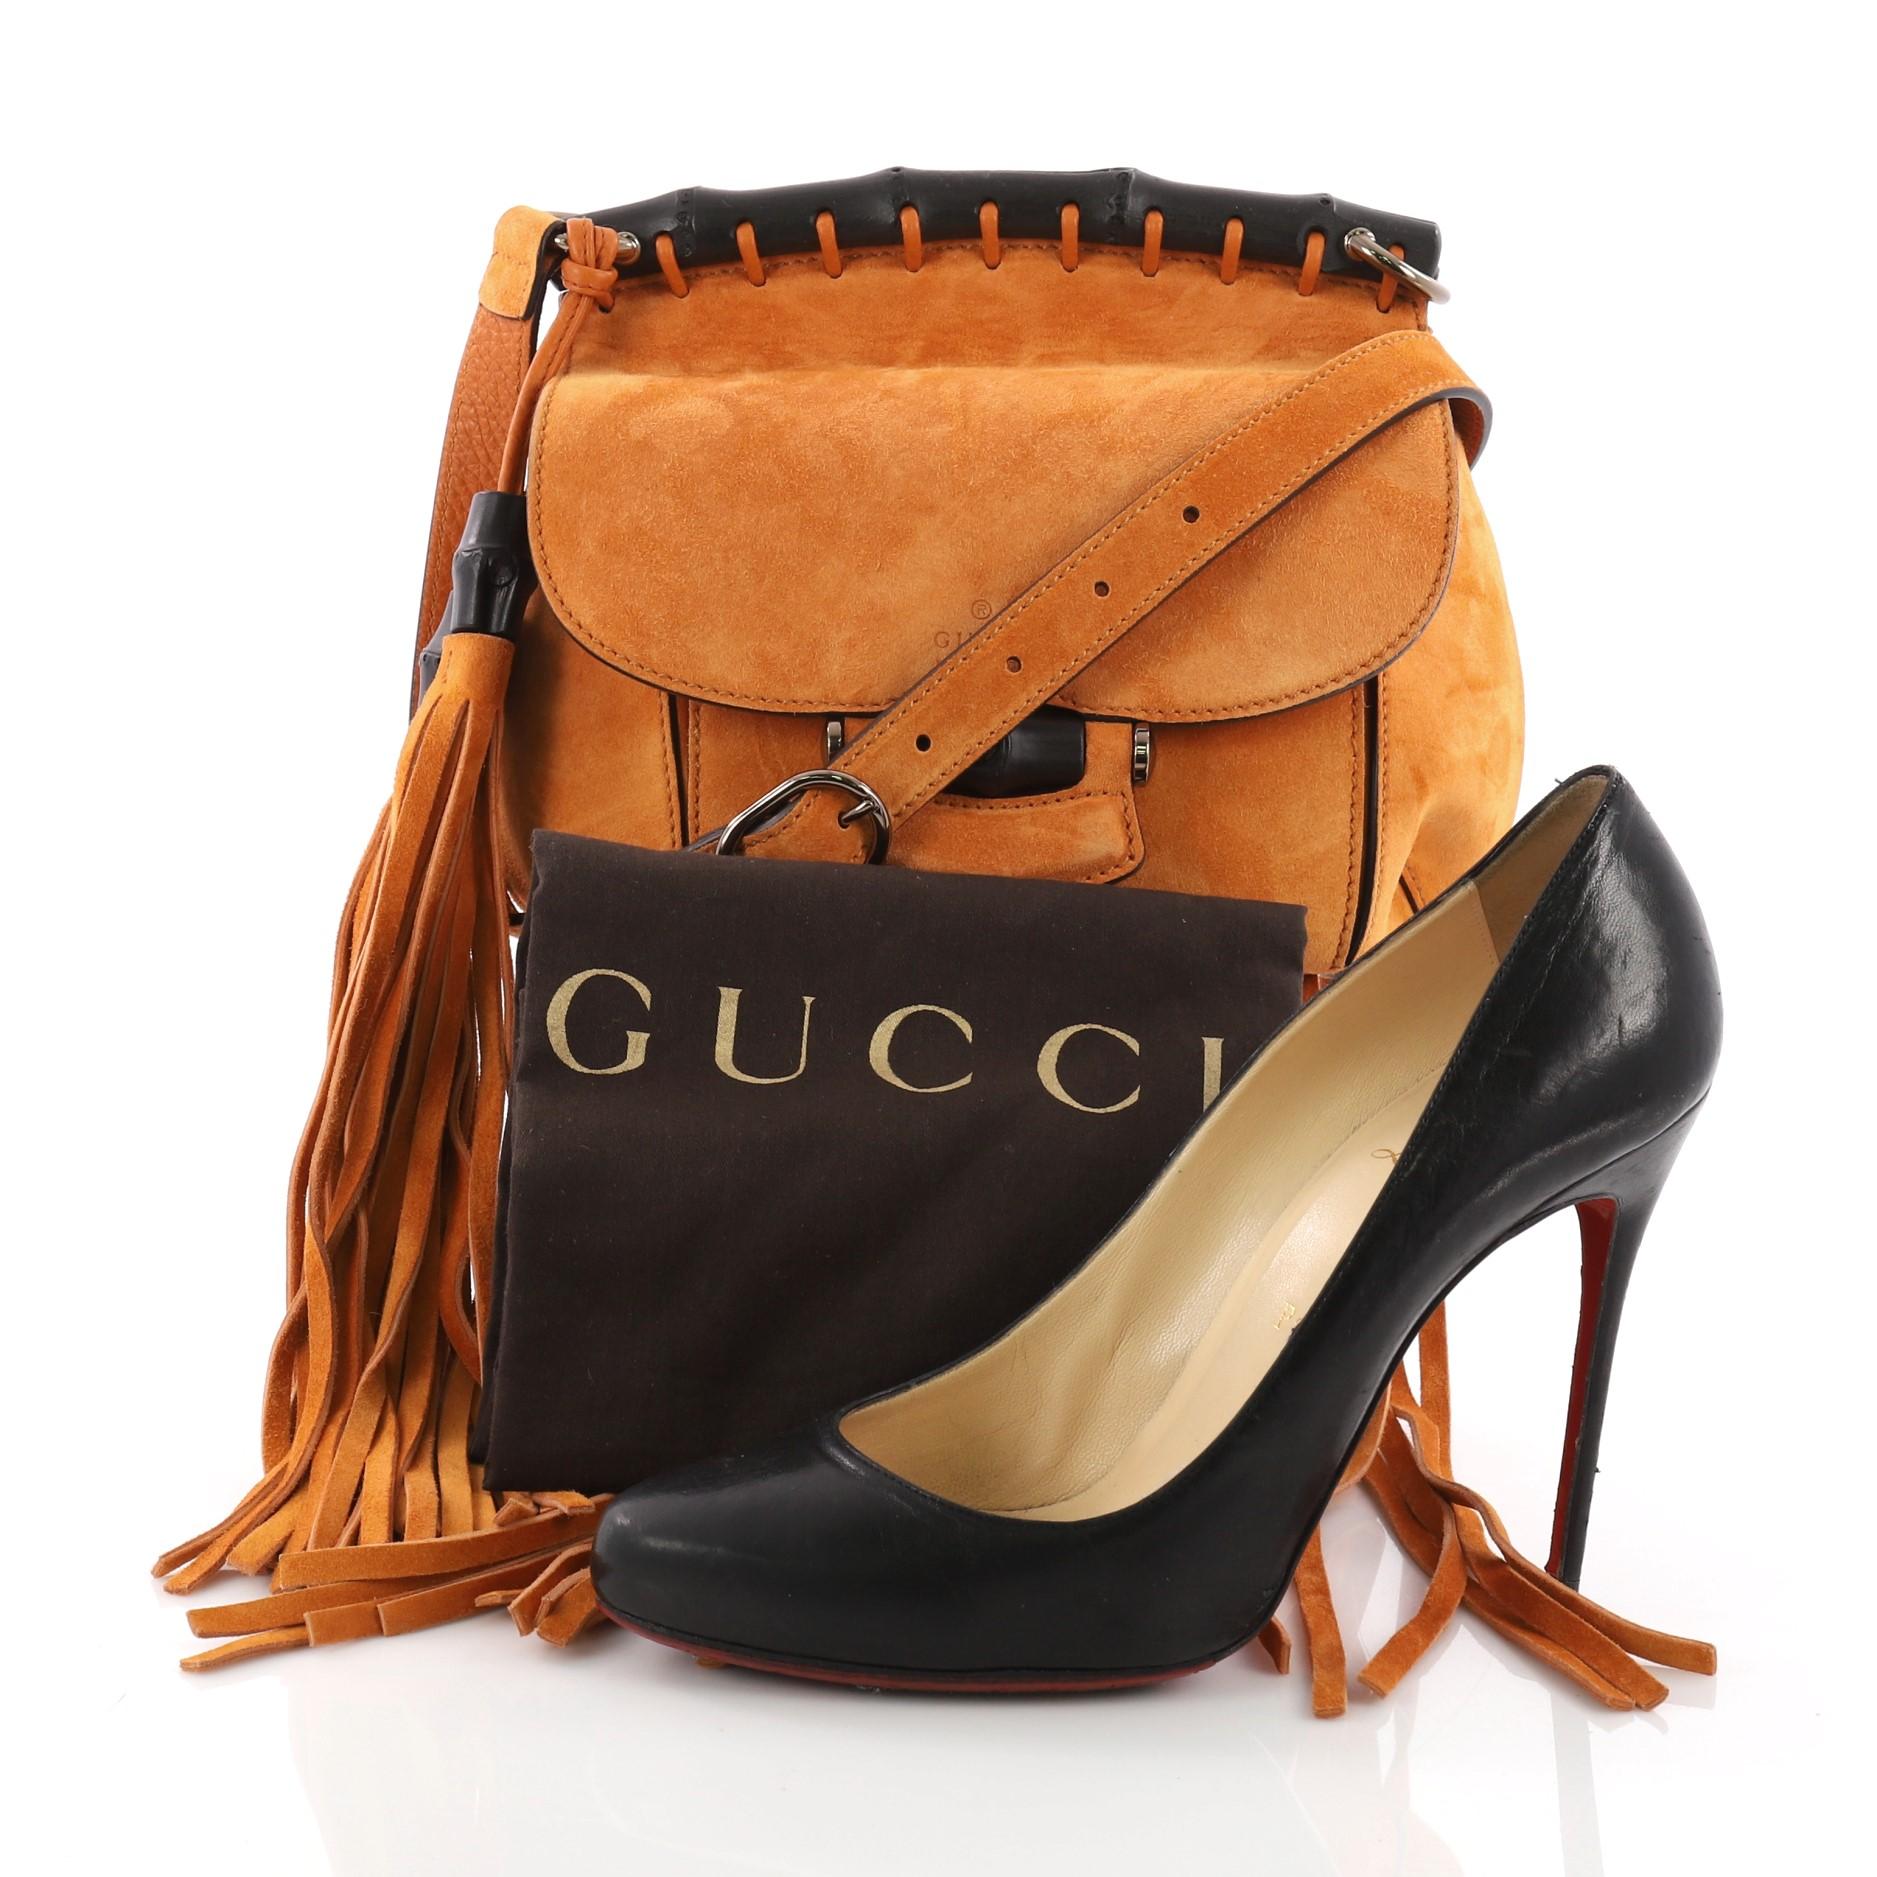 This Gucci Nouveau Fringe Crossbody Bag Suede Small, crafted in orange suede, features adjustable shoulder strap, cascading fringes at its base, and bronze and gold-tone hardware accents. Its bamboo closure opens to a nude leather interior with